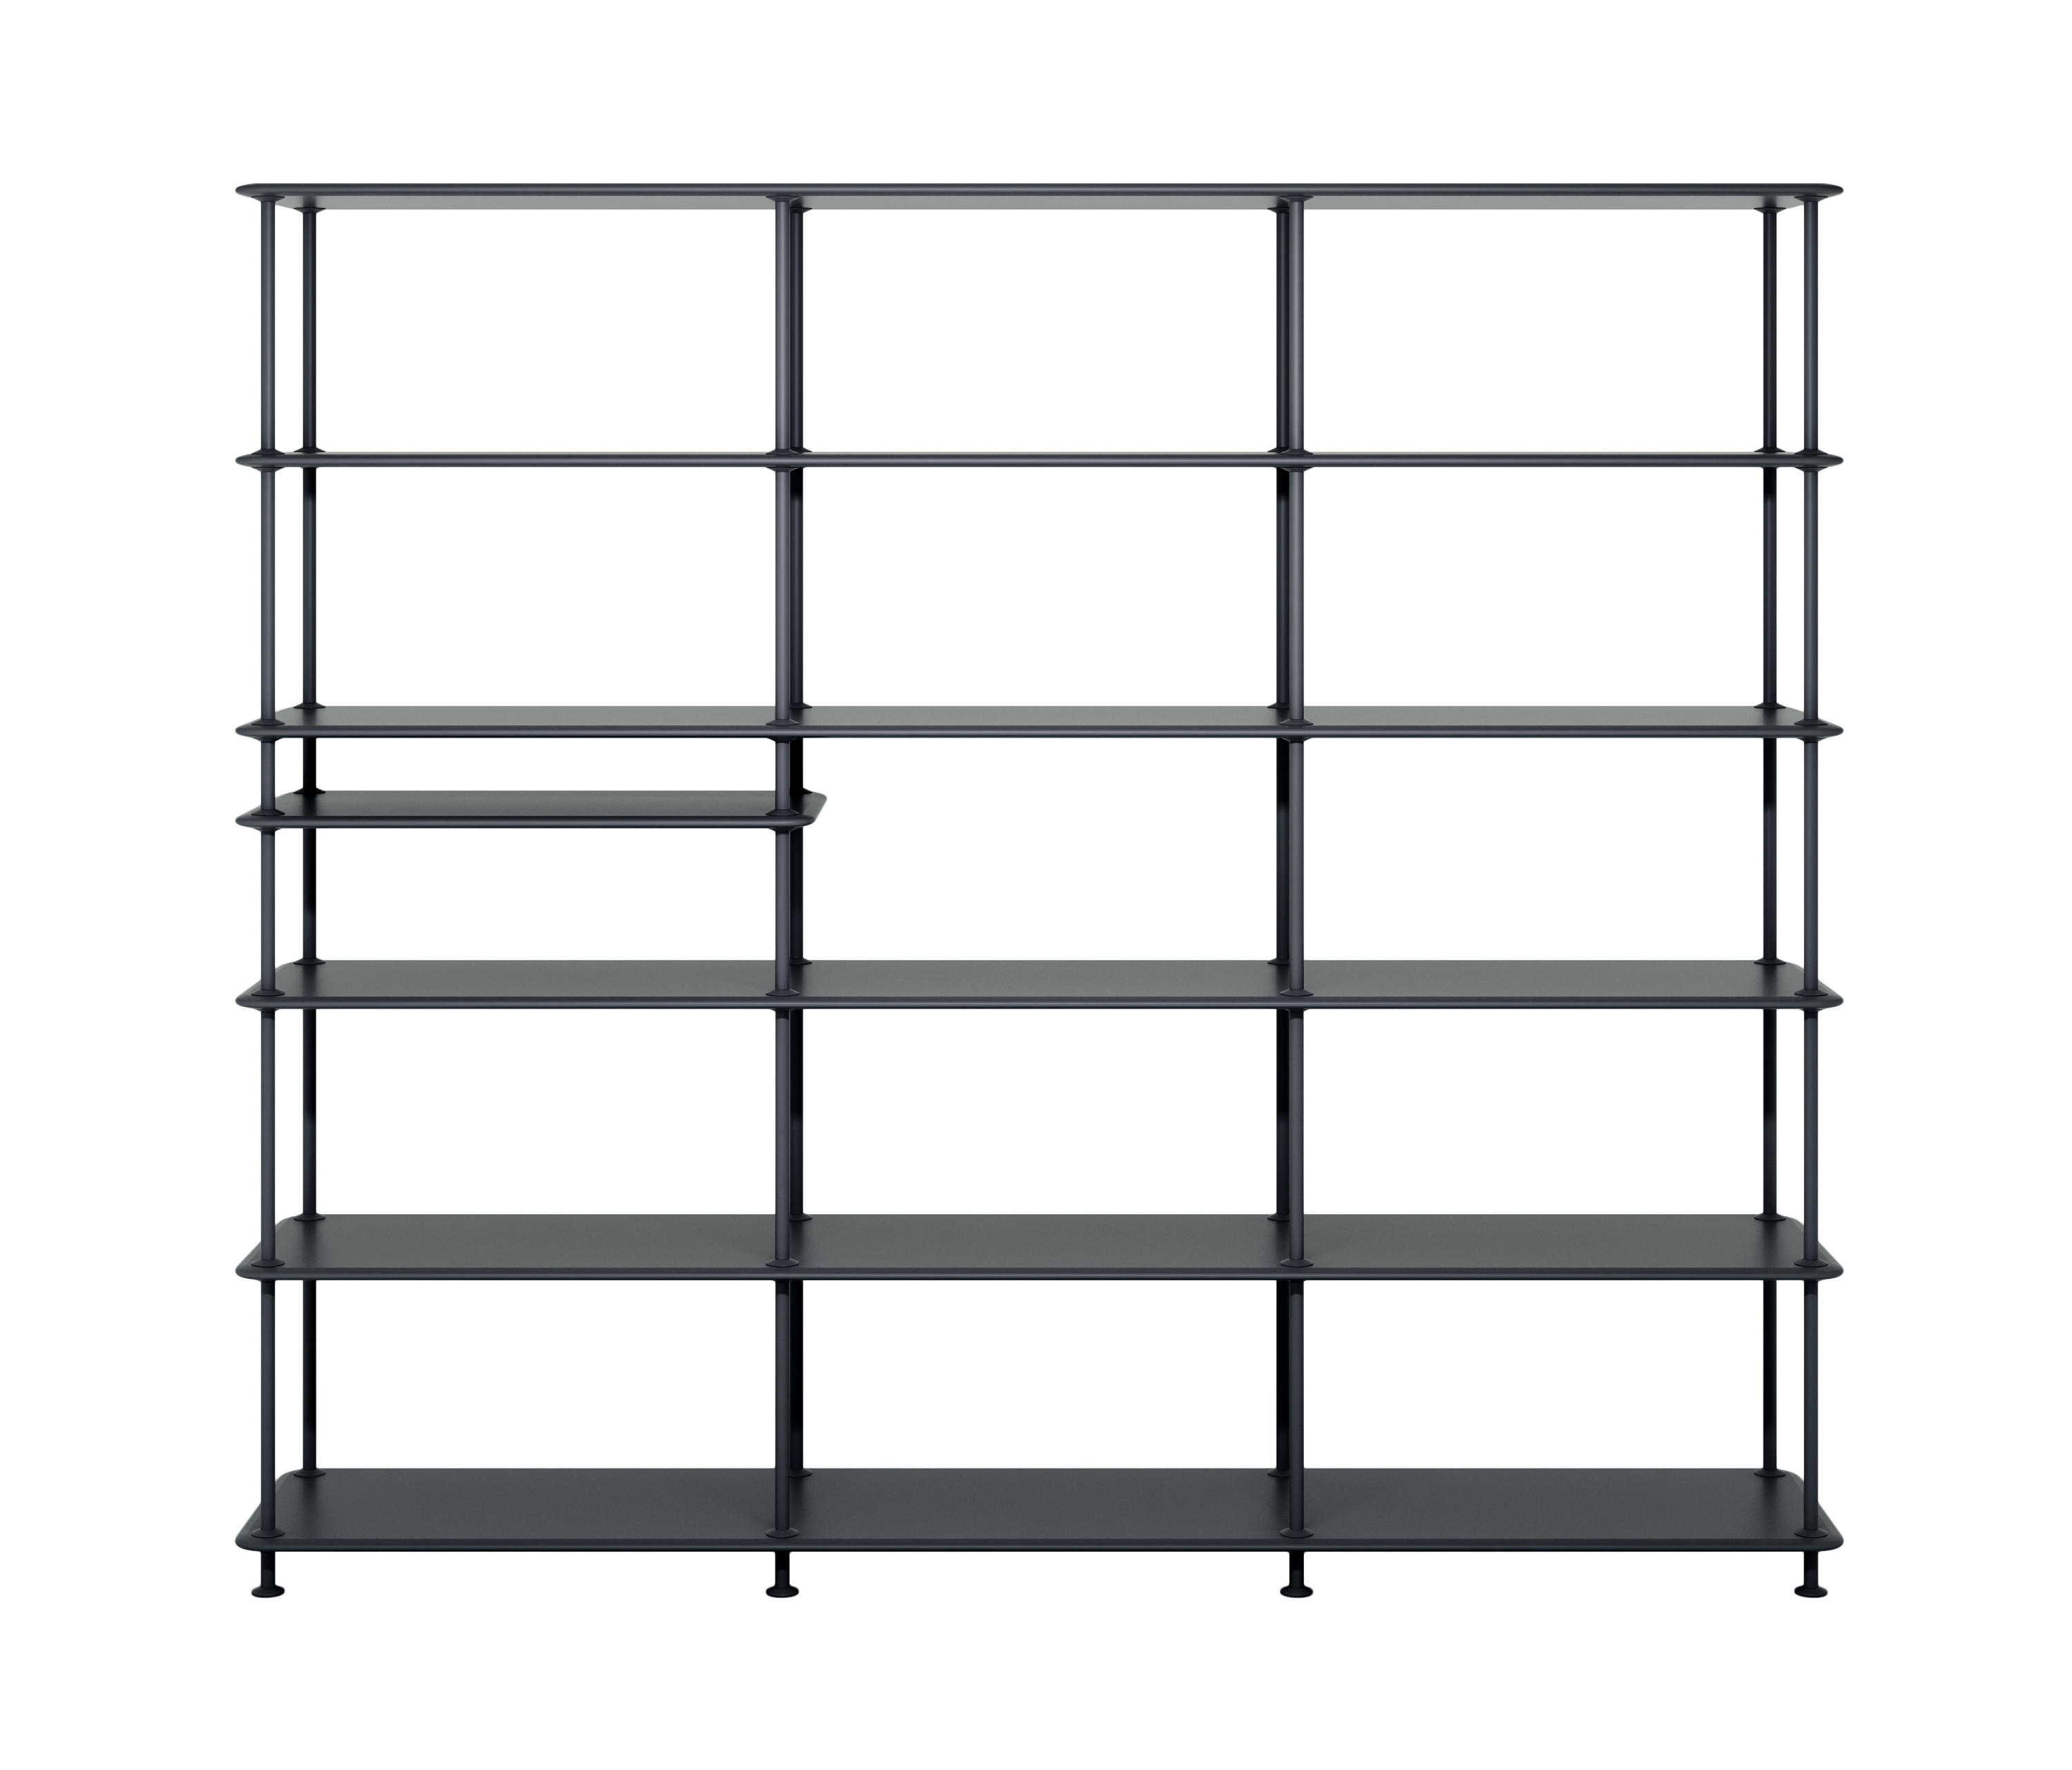 Montana Free (555000) | Large shelf and room divider | Architonic